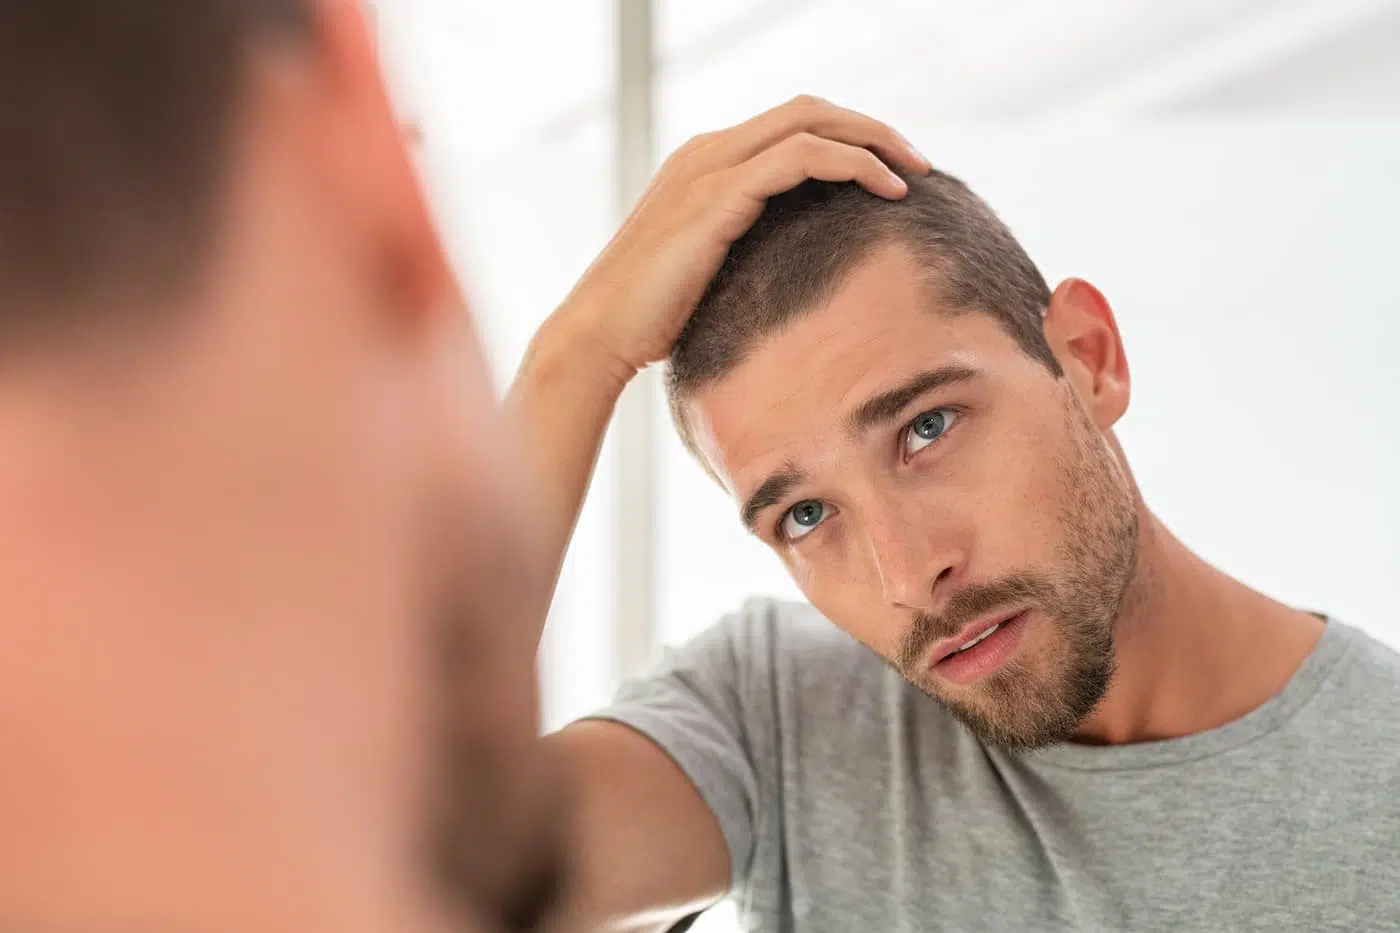 7 common causes of hair loss